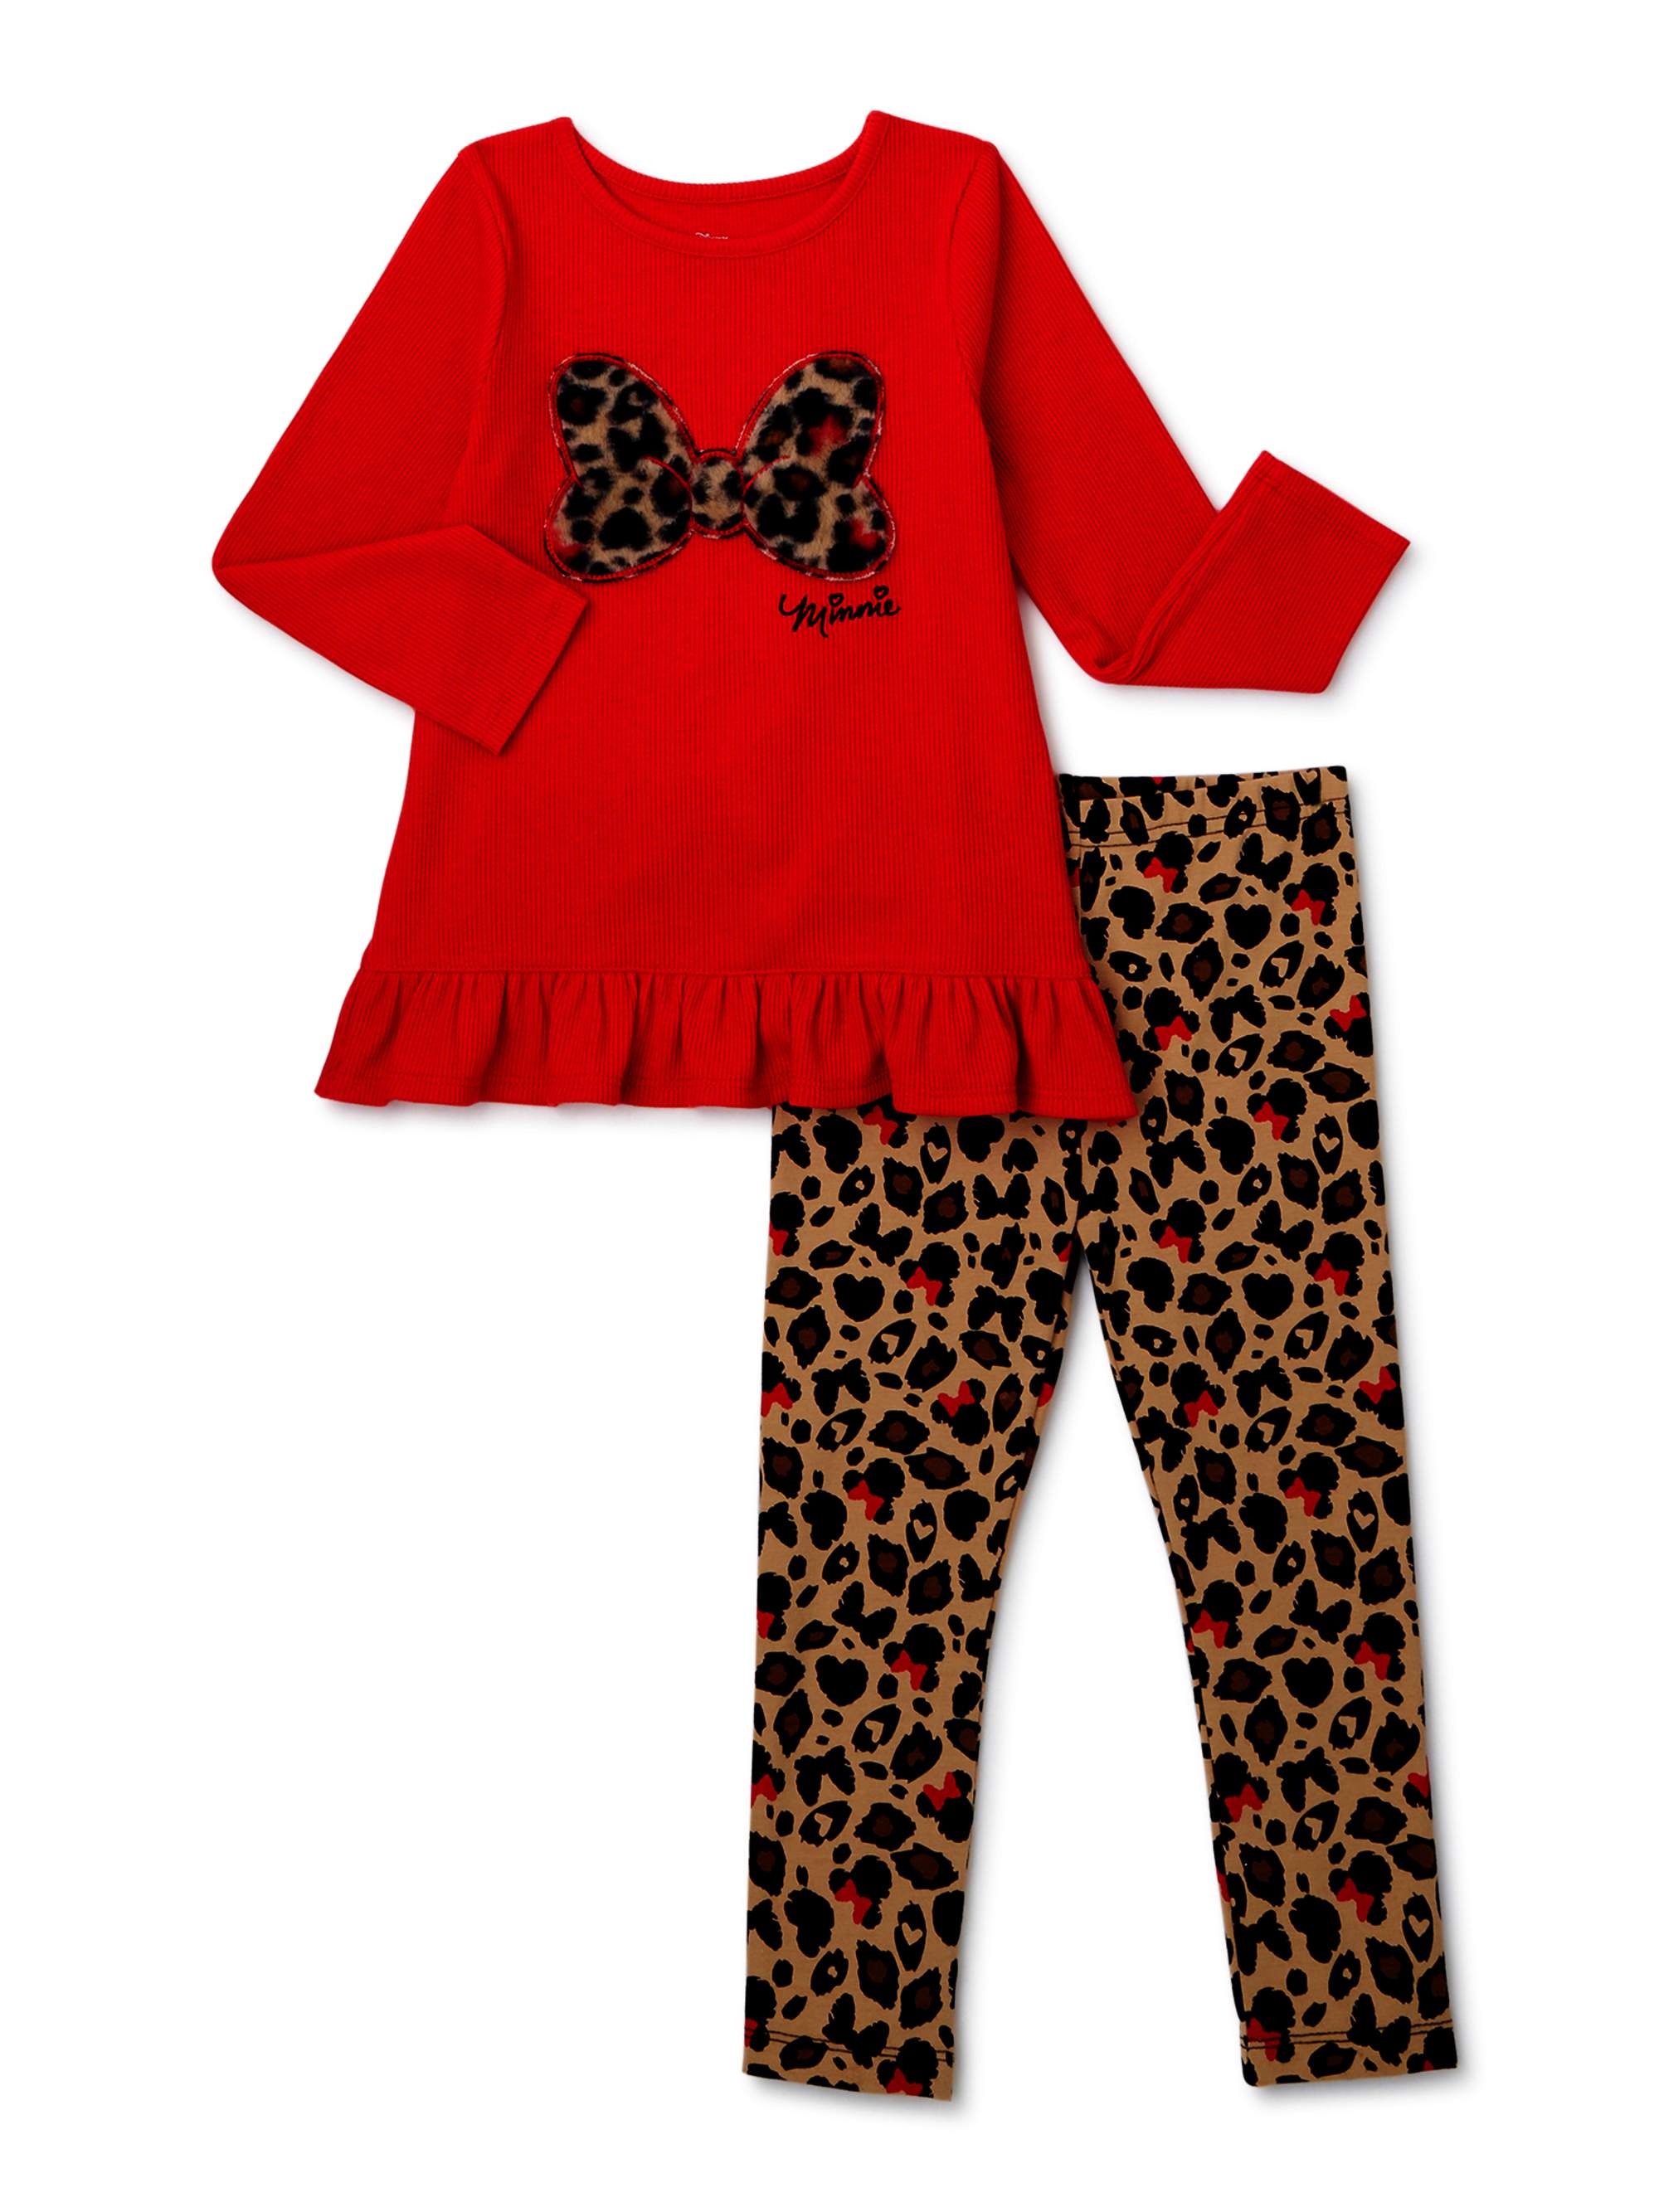 Minnie Mouse Toddler Girls' Bows, 2 Piece Set - image 1 of 3